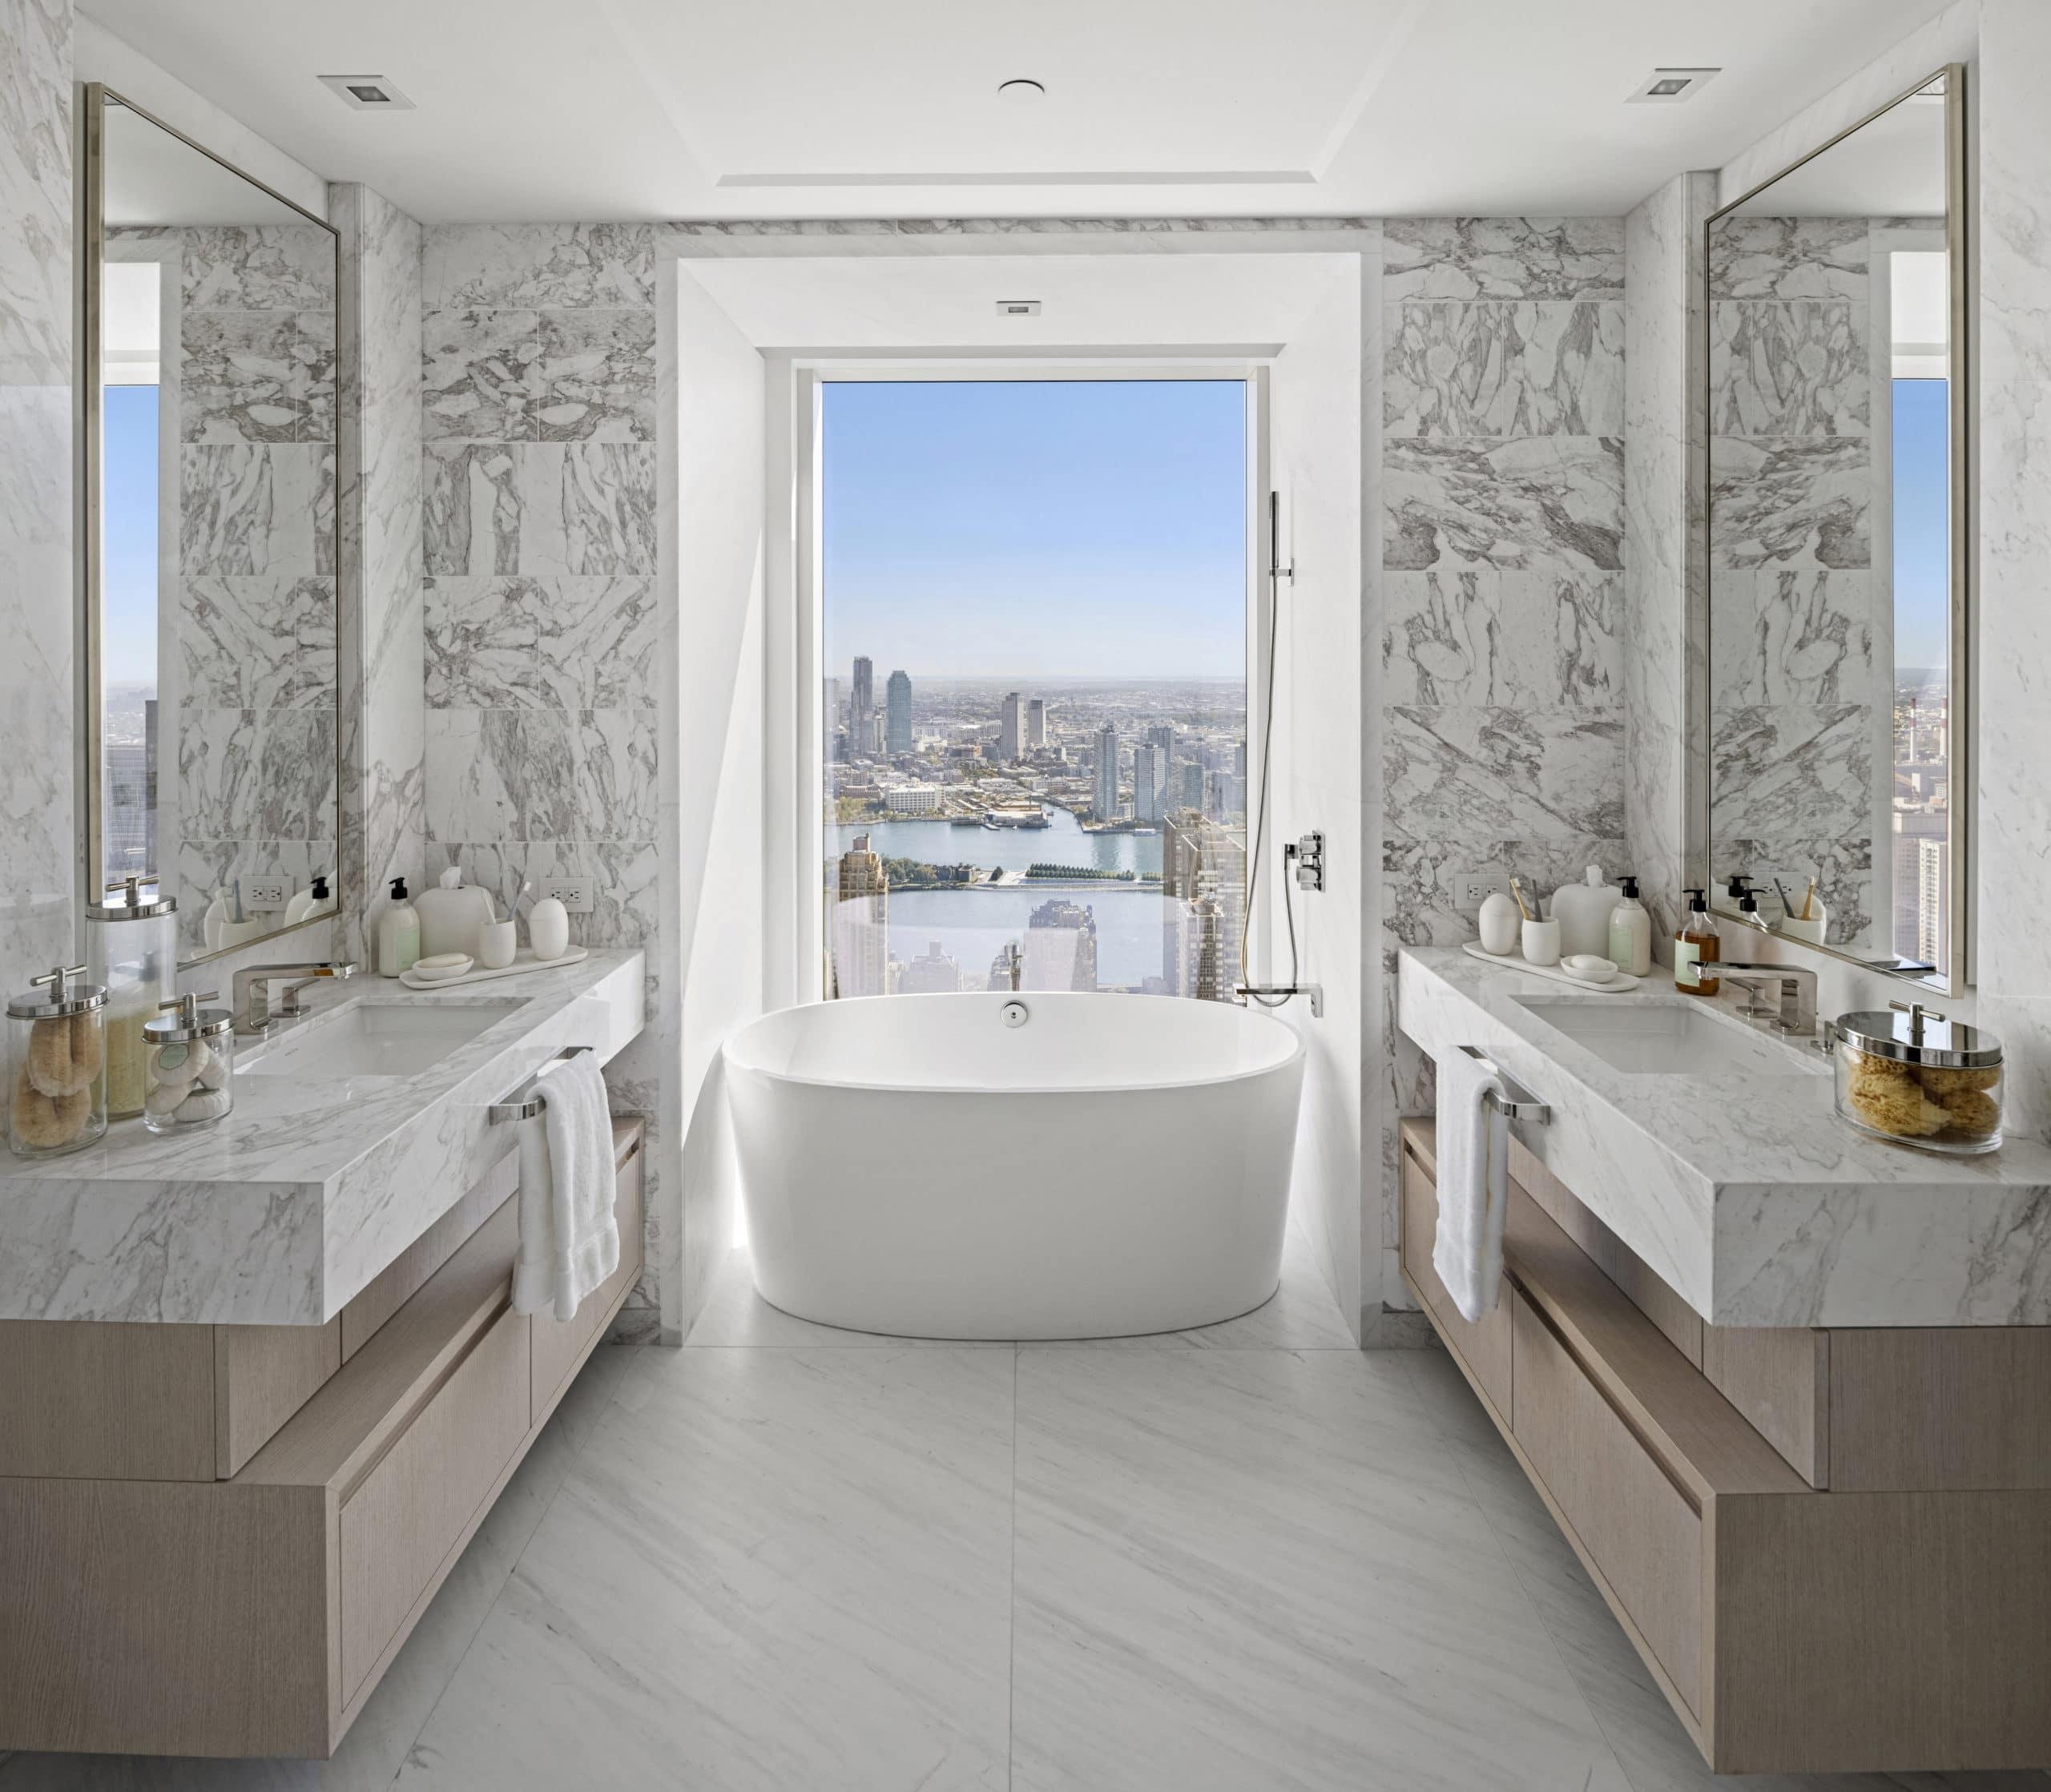 Bathroom at The Centrale in New York. Condo bathroom with double vanities and large soaking tub overlooking Manhattan.